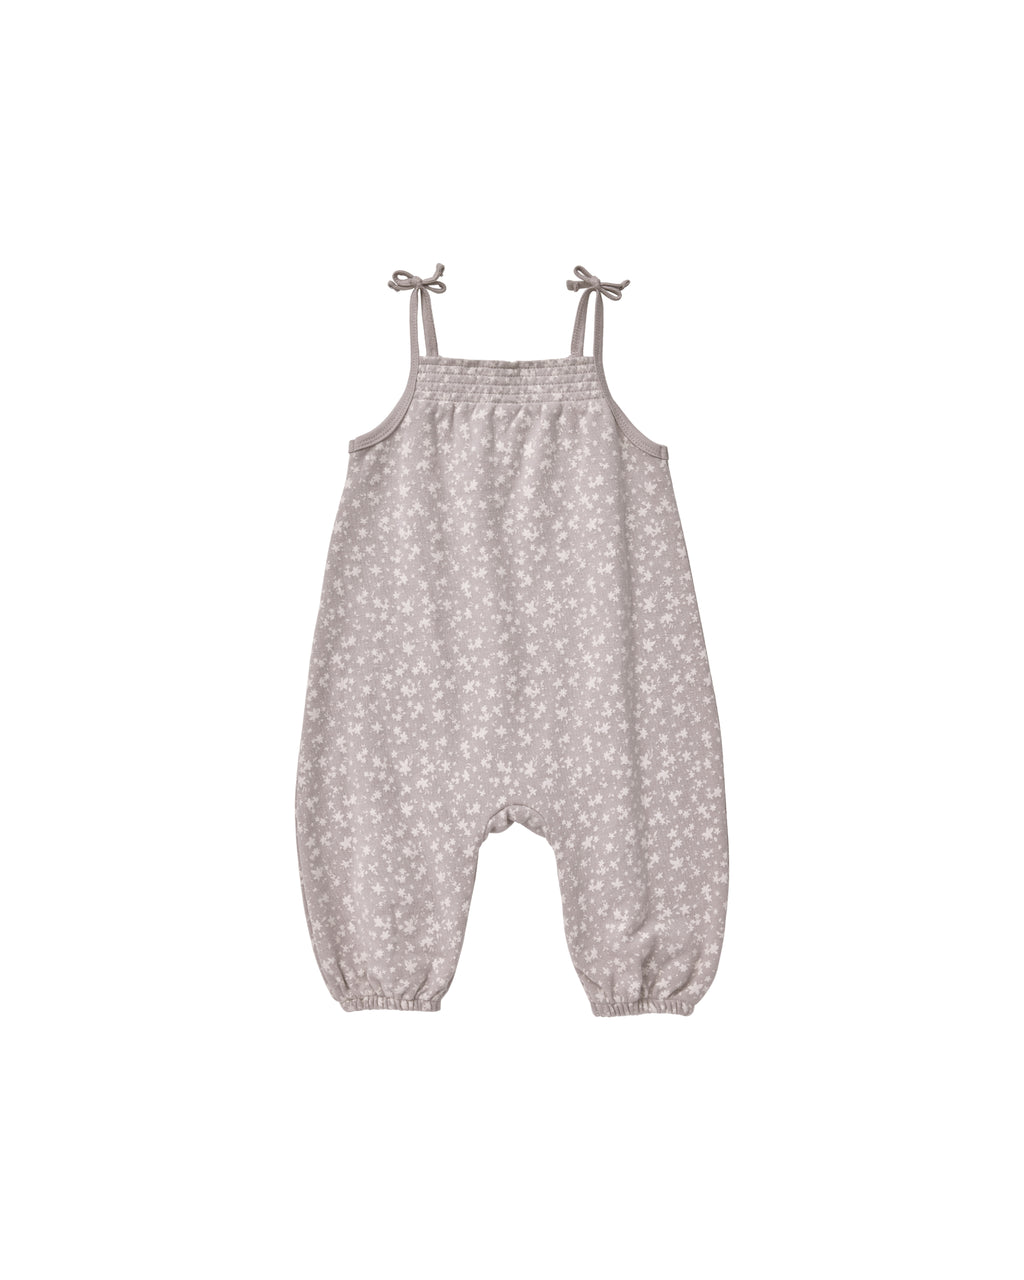 Quincy Mae Smocked Jumpsuit - Scatter